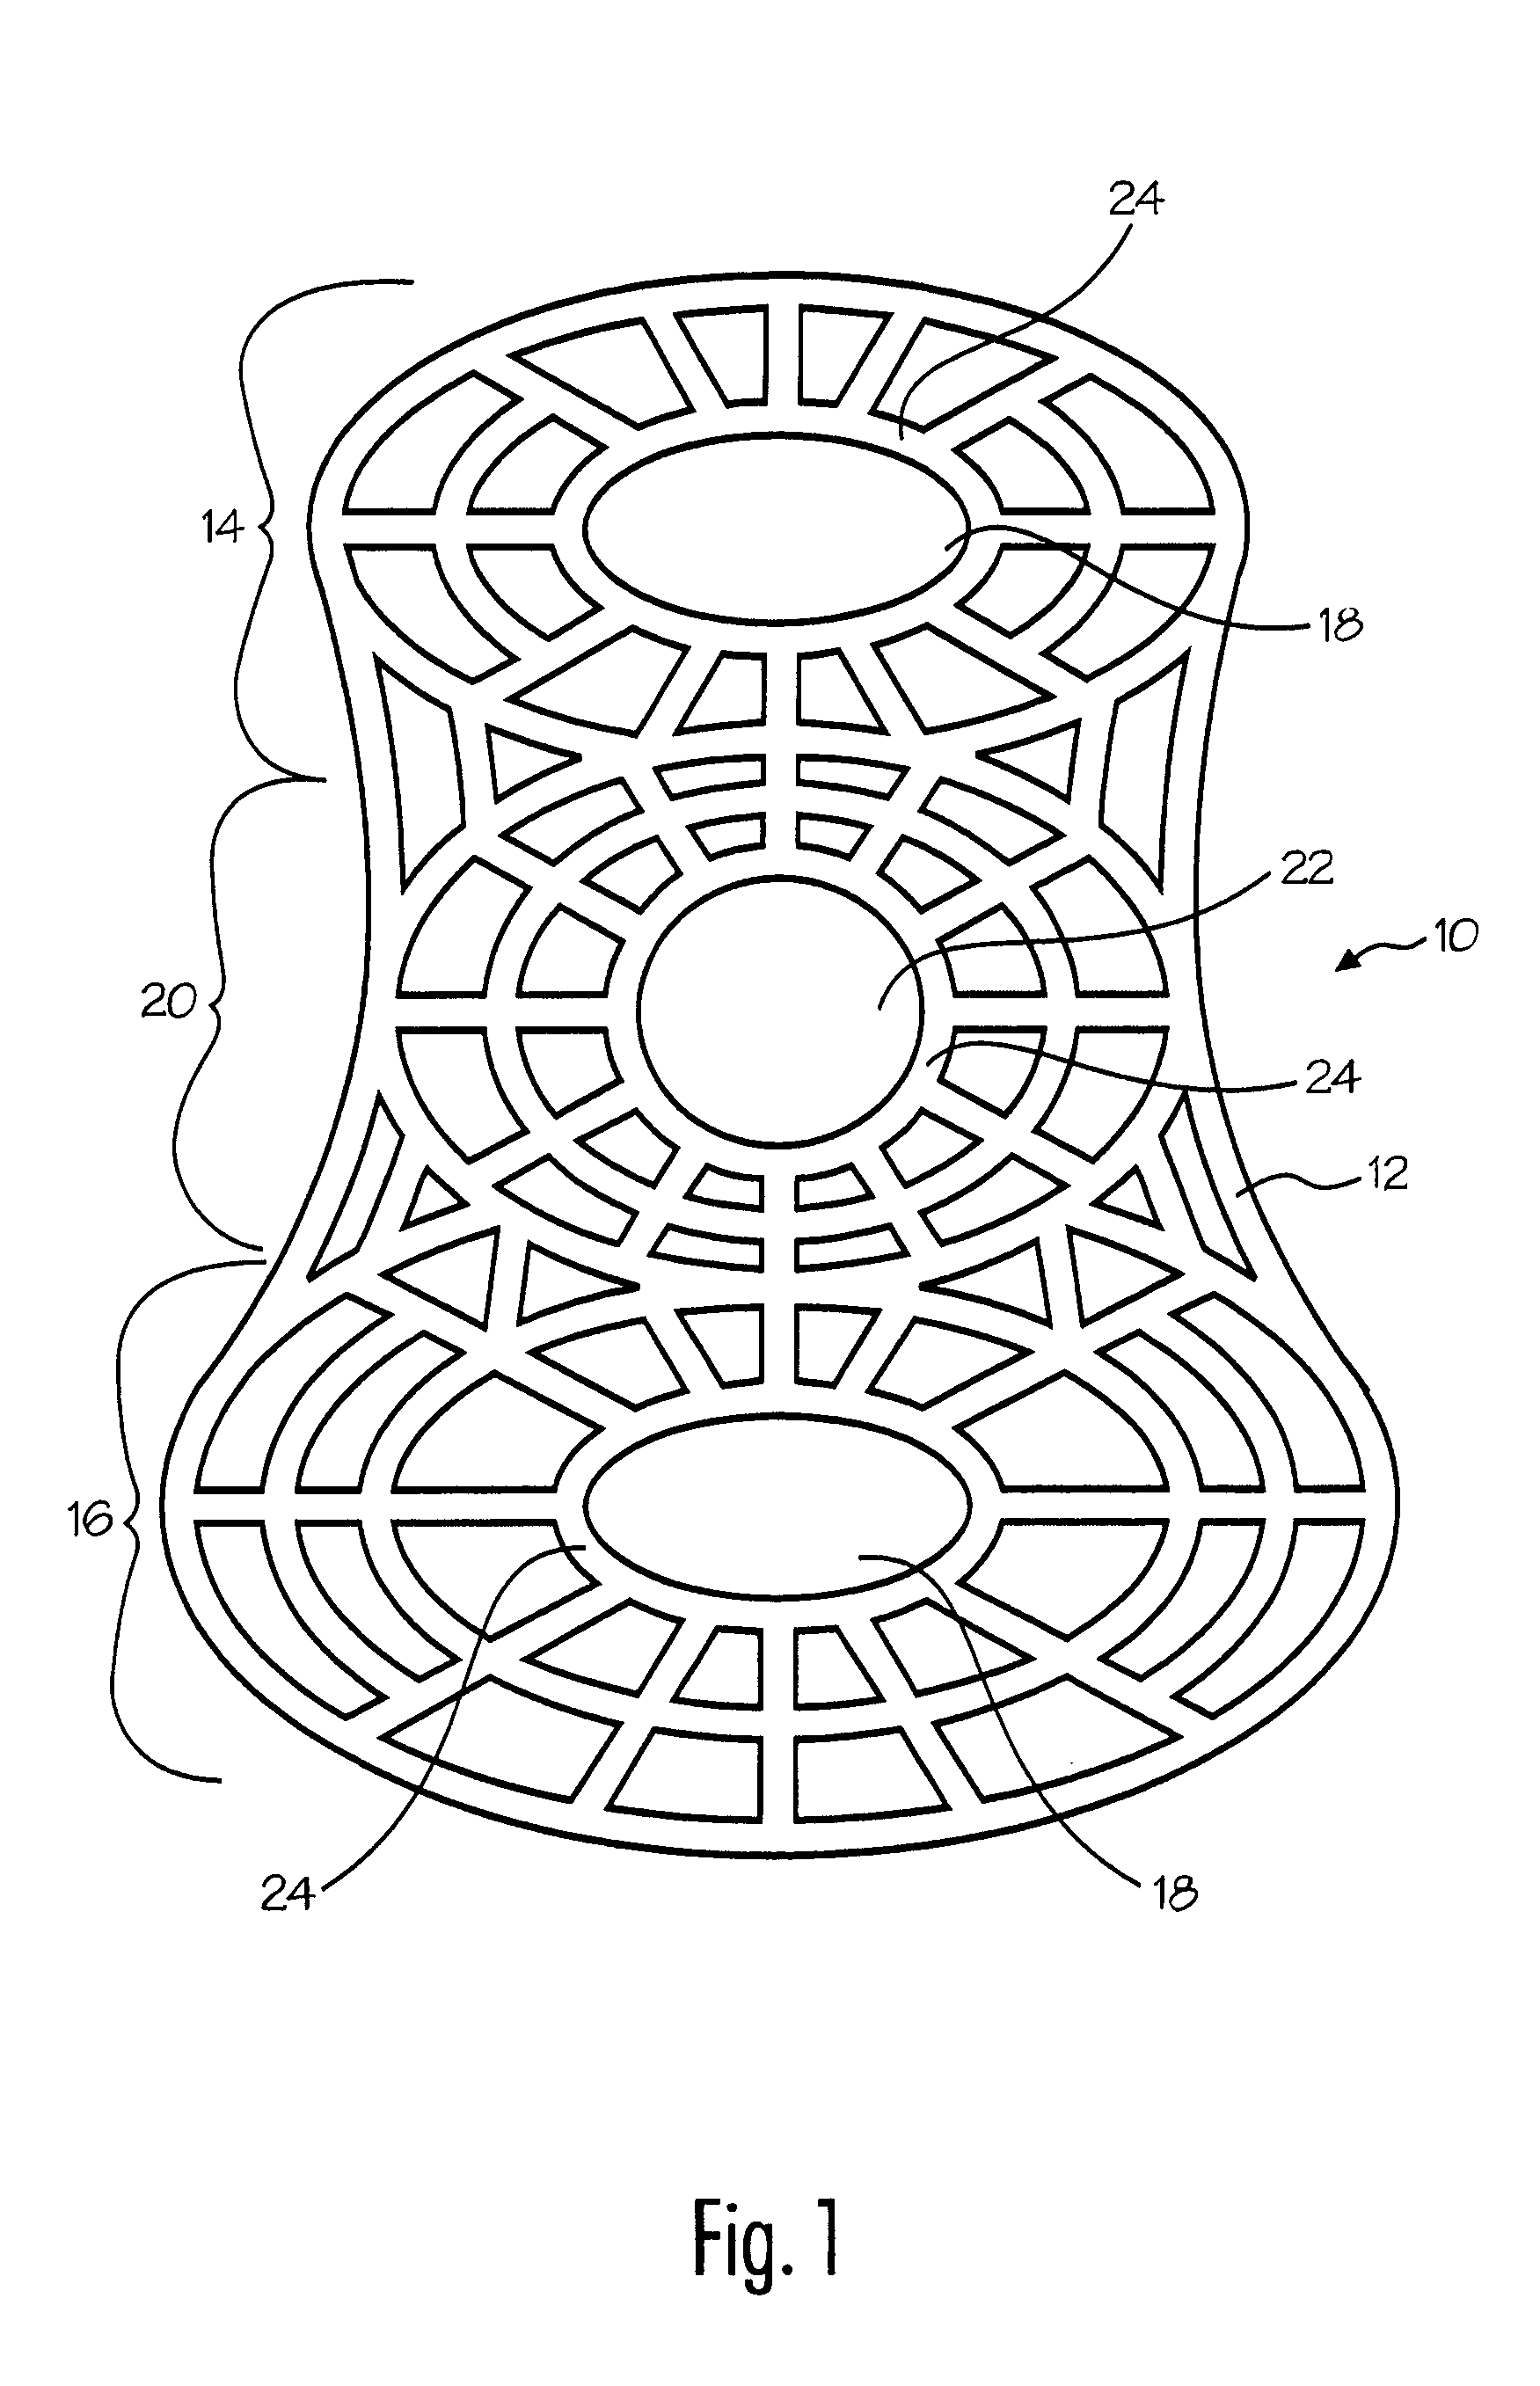 Device for use in stimulating bone growth